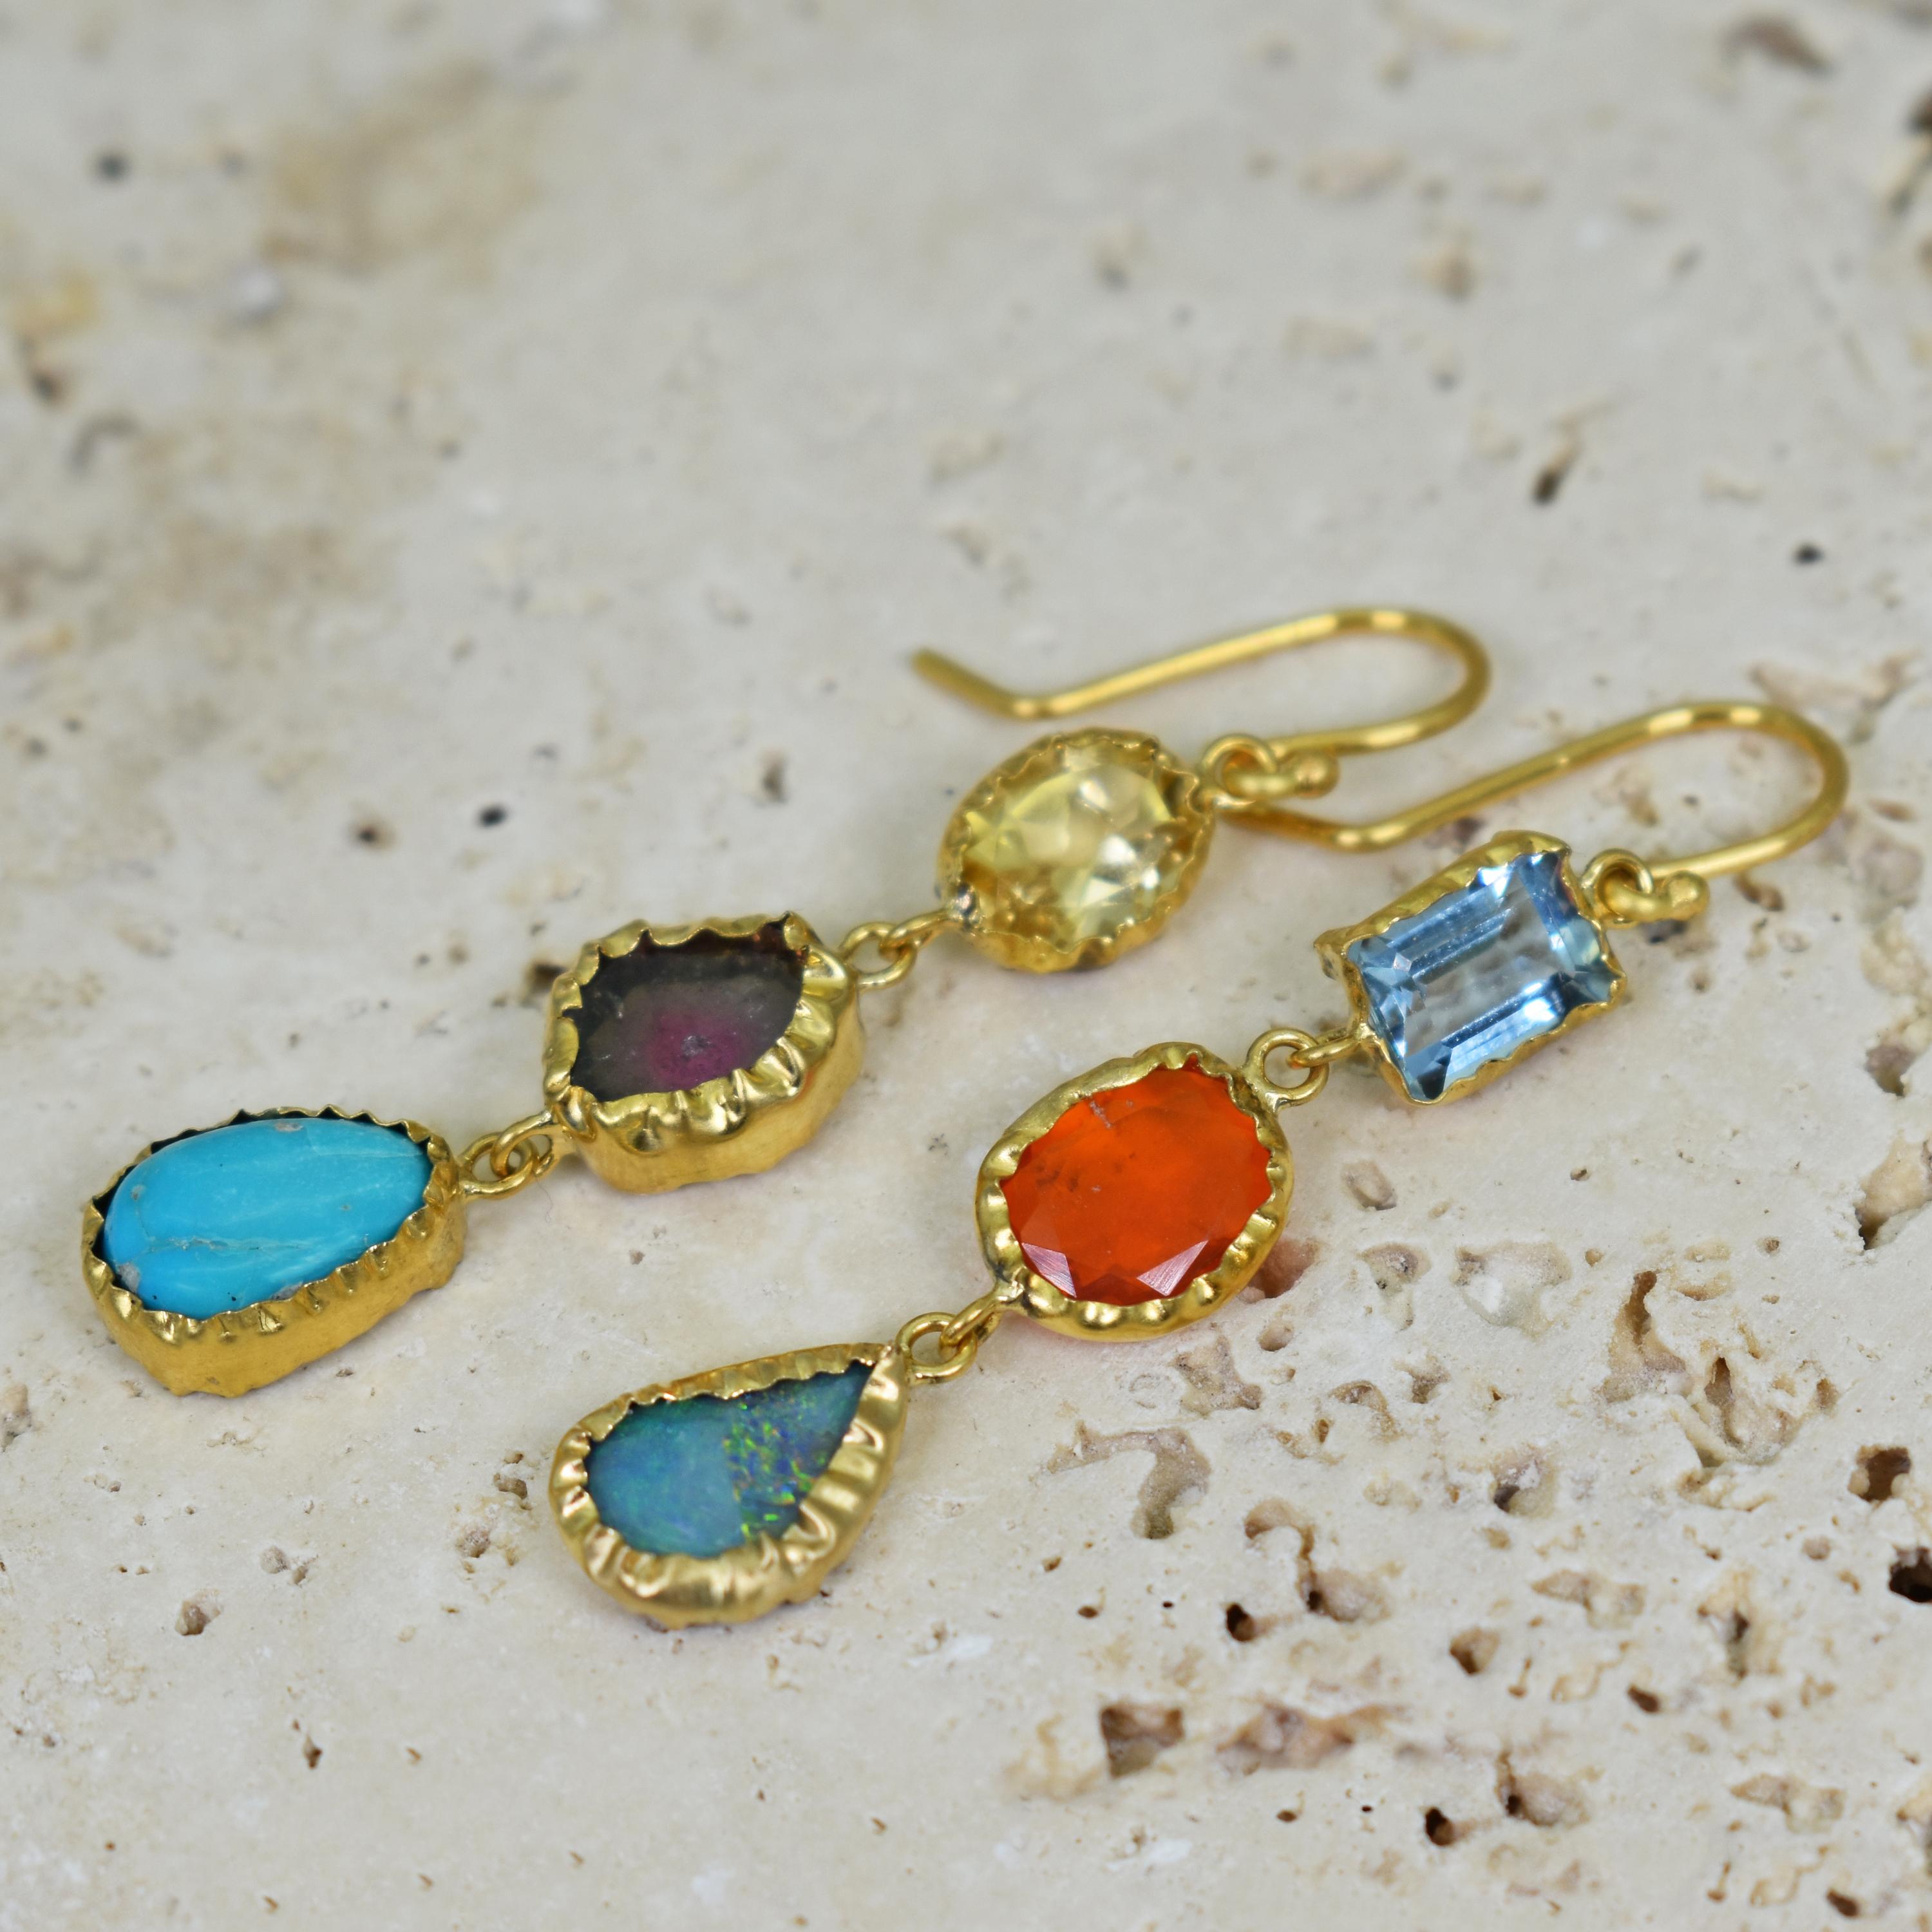 Multi-gemstone, 3-tier 22k yellow gold handmade dangle earrings featuring Citrine, Tourmaline, Turquoise, Aquamarine, Fire Opal and Australian Opal gemstones. Dangle earrings, including ear wires, are 2.07 inches in length. 